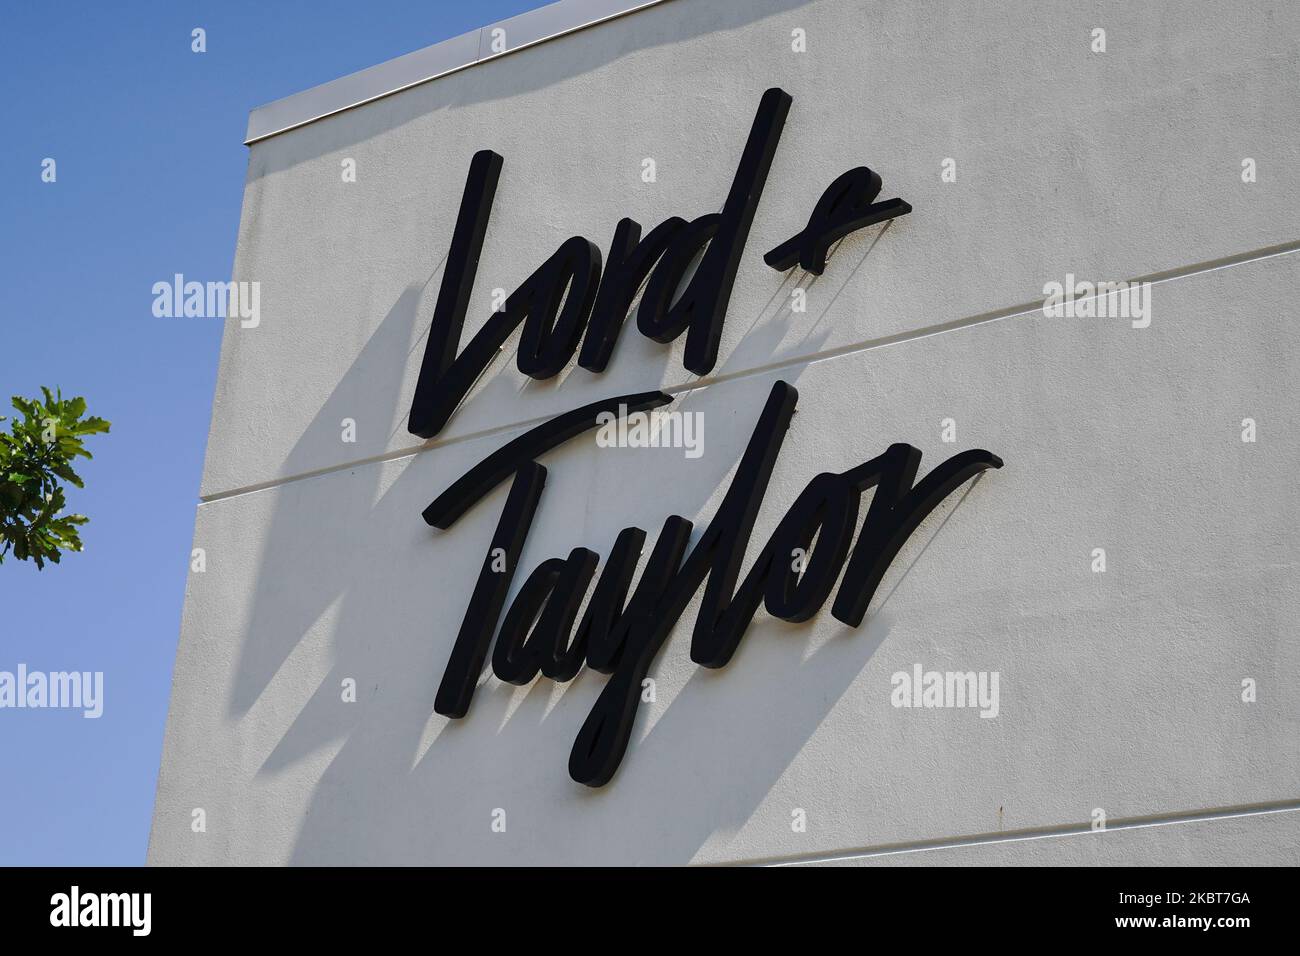 A view of a Lord & Taylor department store in Queens, New York, USA., on July 4, 2020. (Photo by John Nacion/NurPhoto) Stock Photo